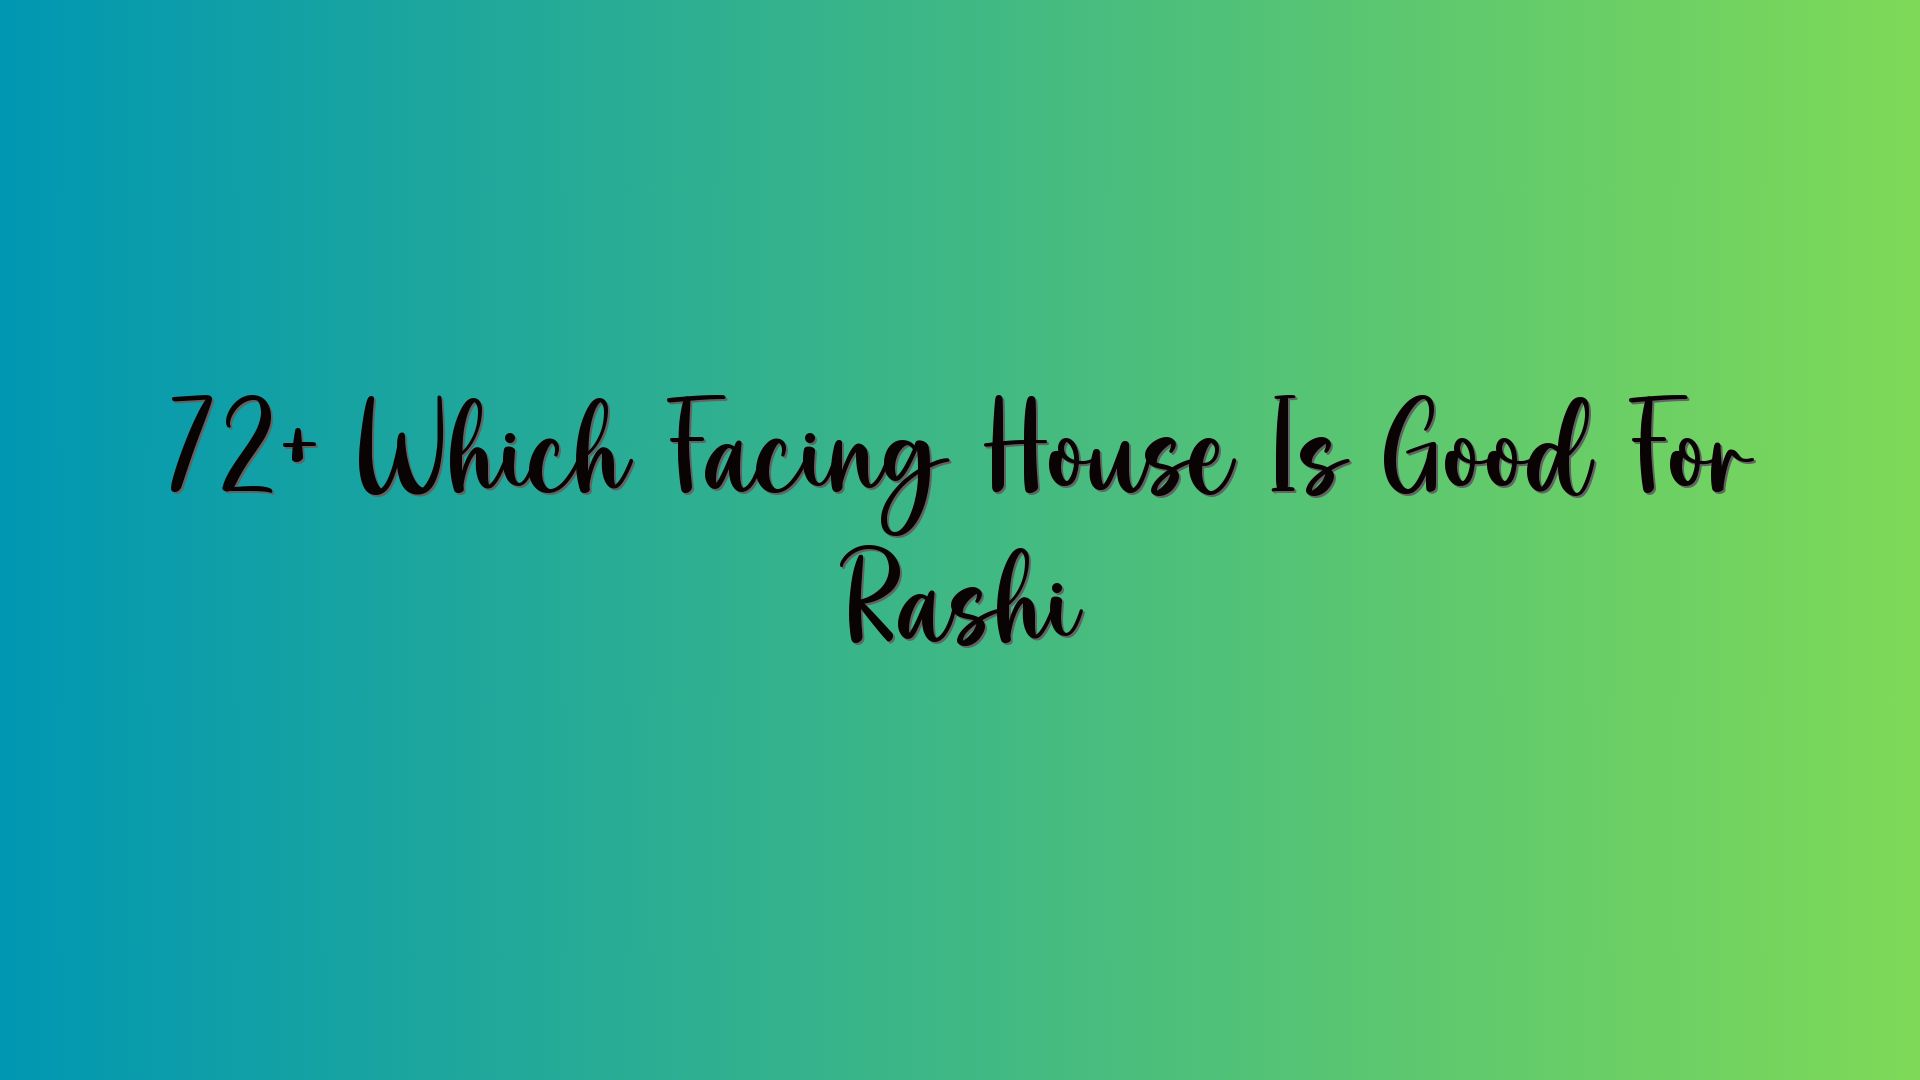 72+ Which Facing House Is Good For Rashi